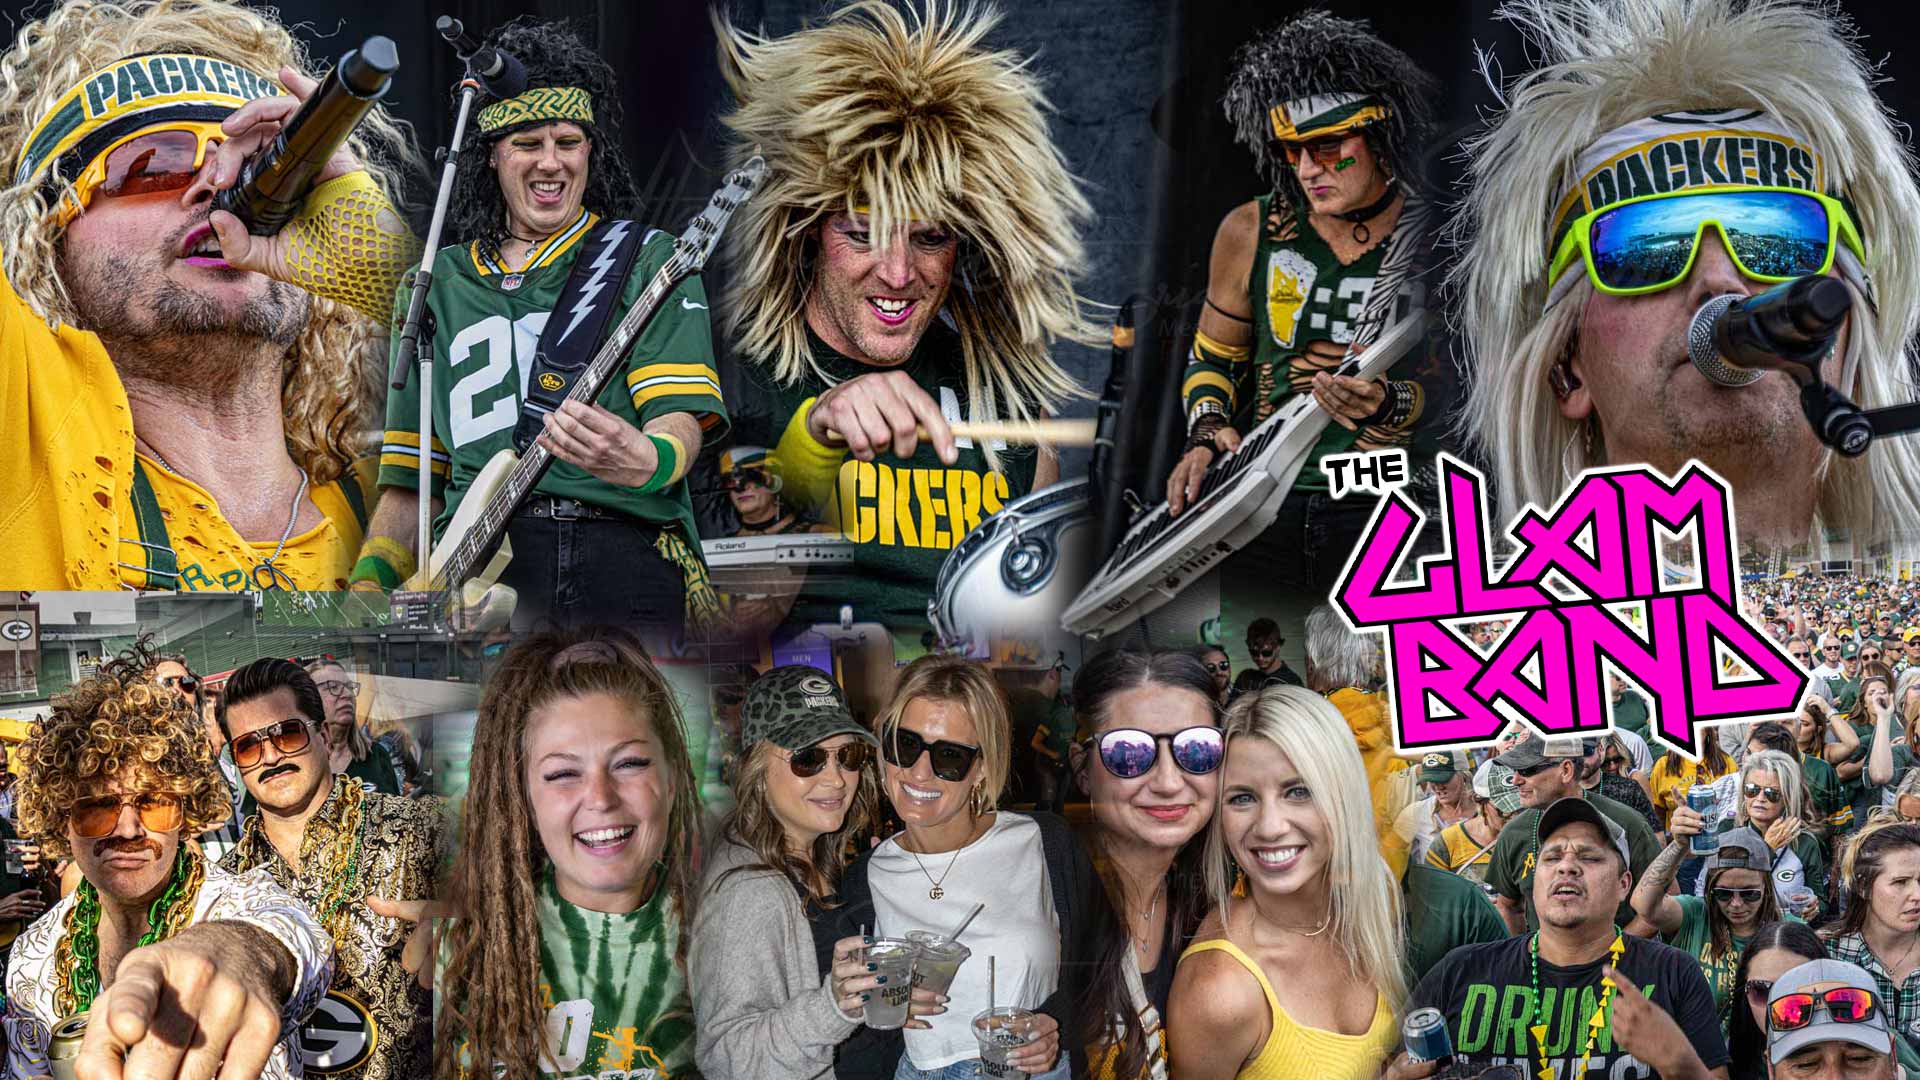 The Glam Band touchdown at Stadium View in Green Bay after the Packers Game